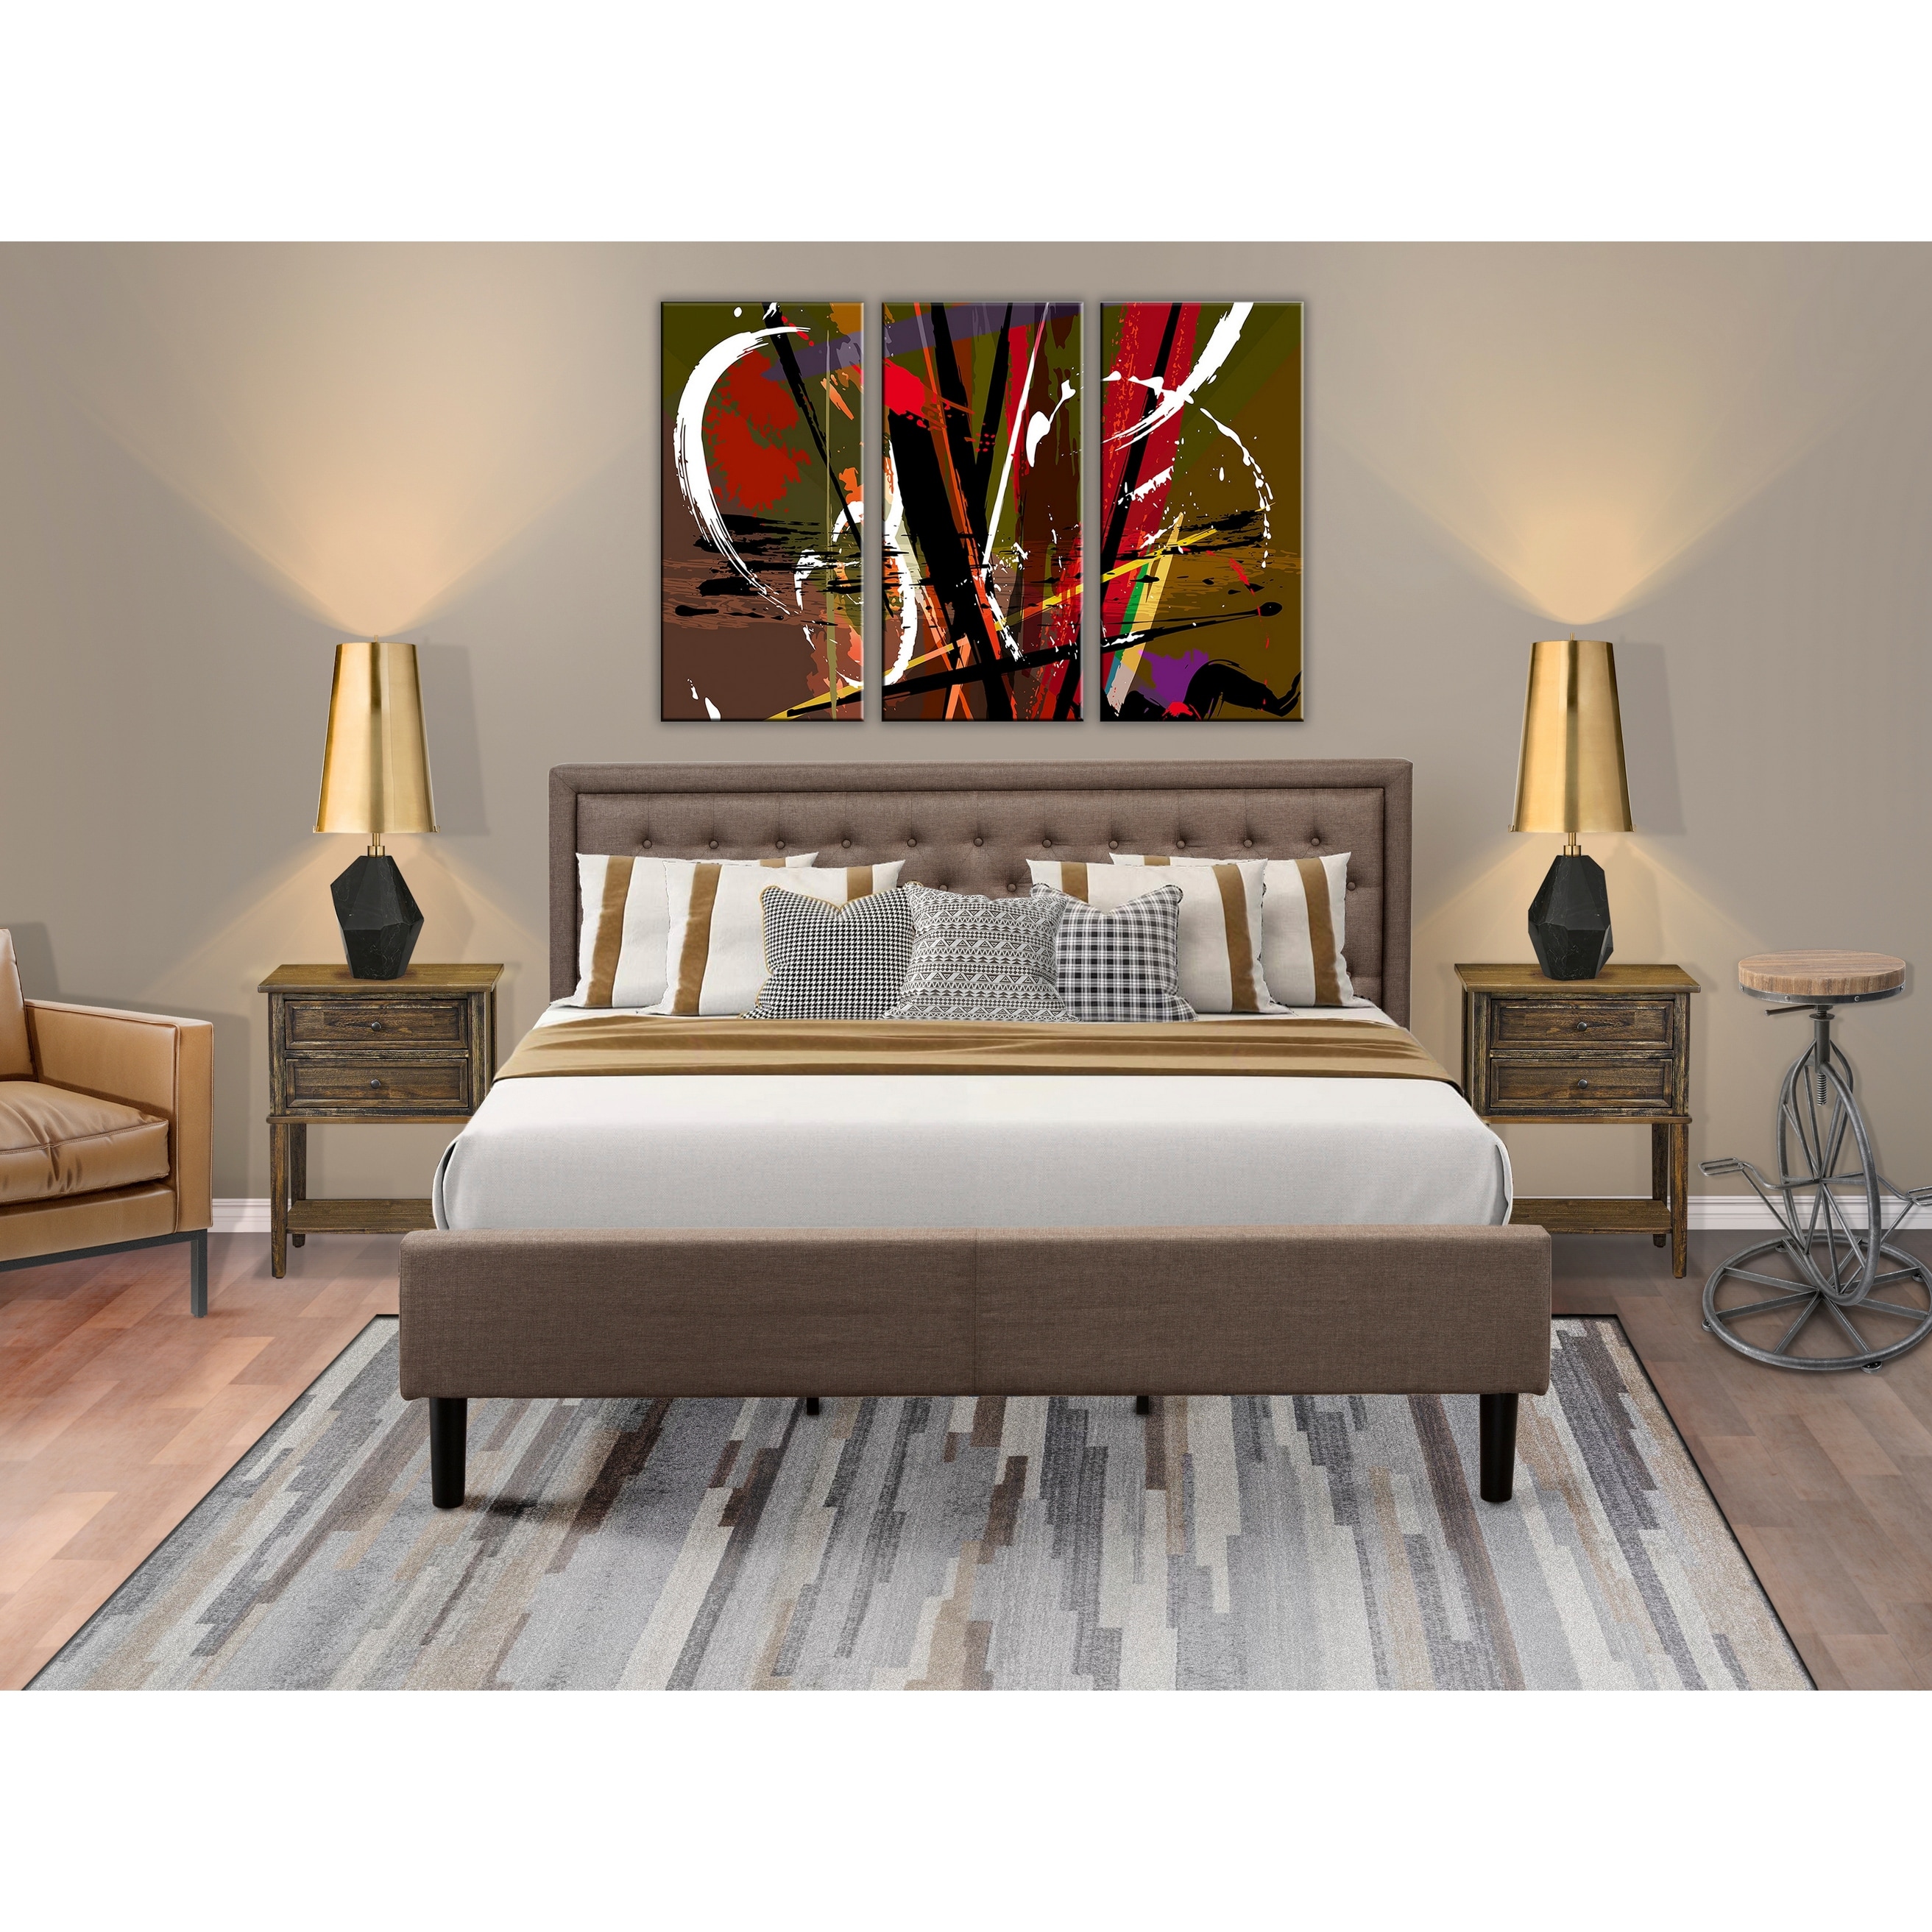 East West Furniture Wooden Bedroom Set - King Bed Frame - Brown Headboard With Small Nightstand (end Table Pieces Option)